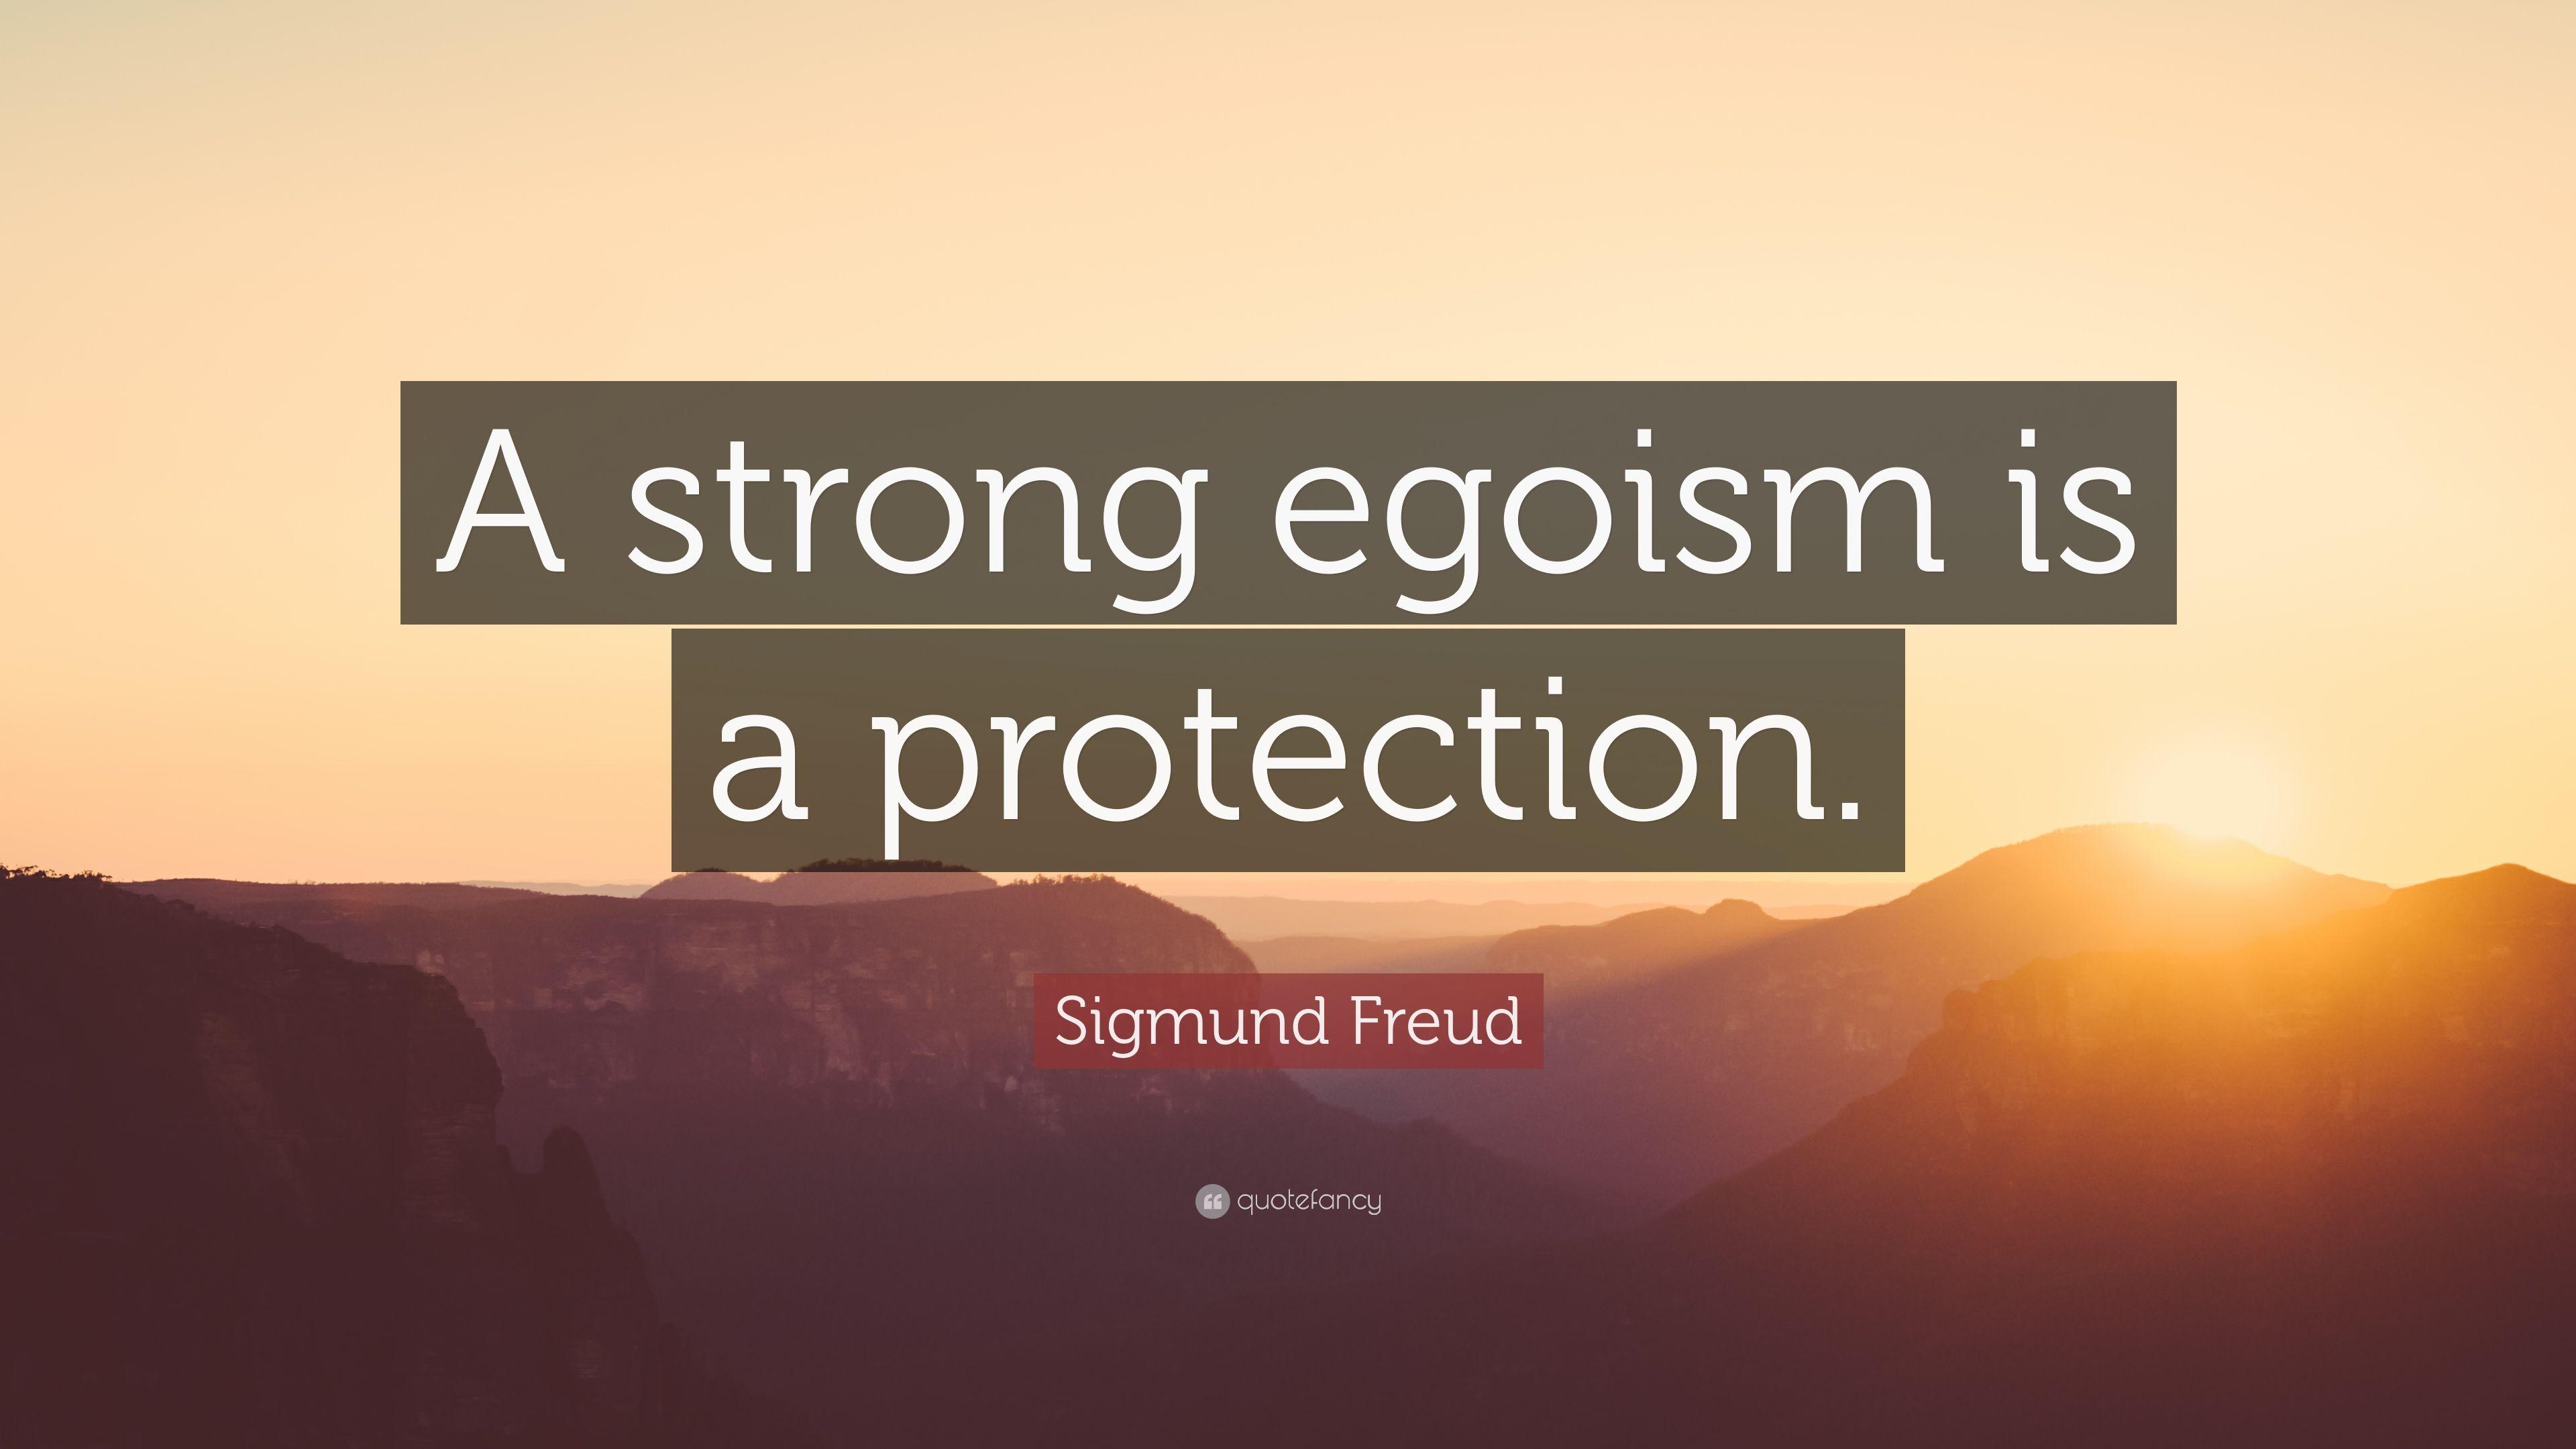 Sigmund Freud Quote: “A strong egoism is a protection.” 12